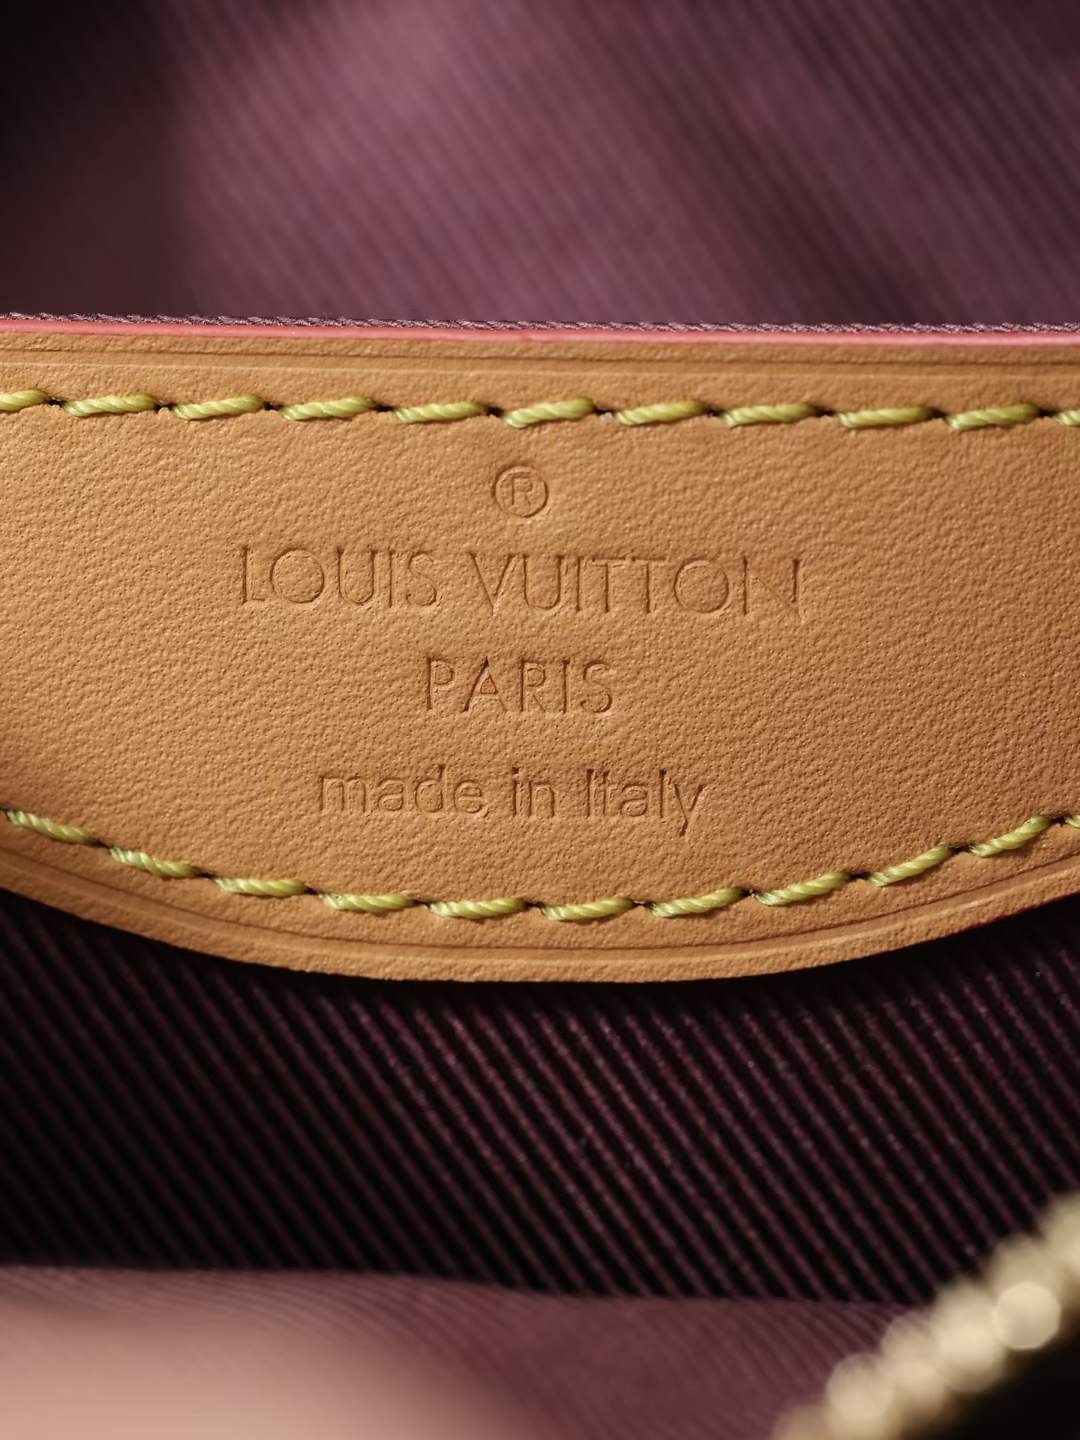 Louis Vuitton M45832 croissant with yellow leather Boulogne top replica handbags Logo engraved detail (2022 Updated)-Best Quality Fake designer Bag Review, Replica designer bag ru